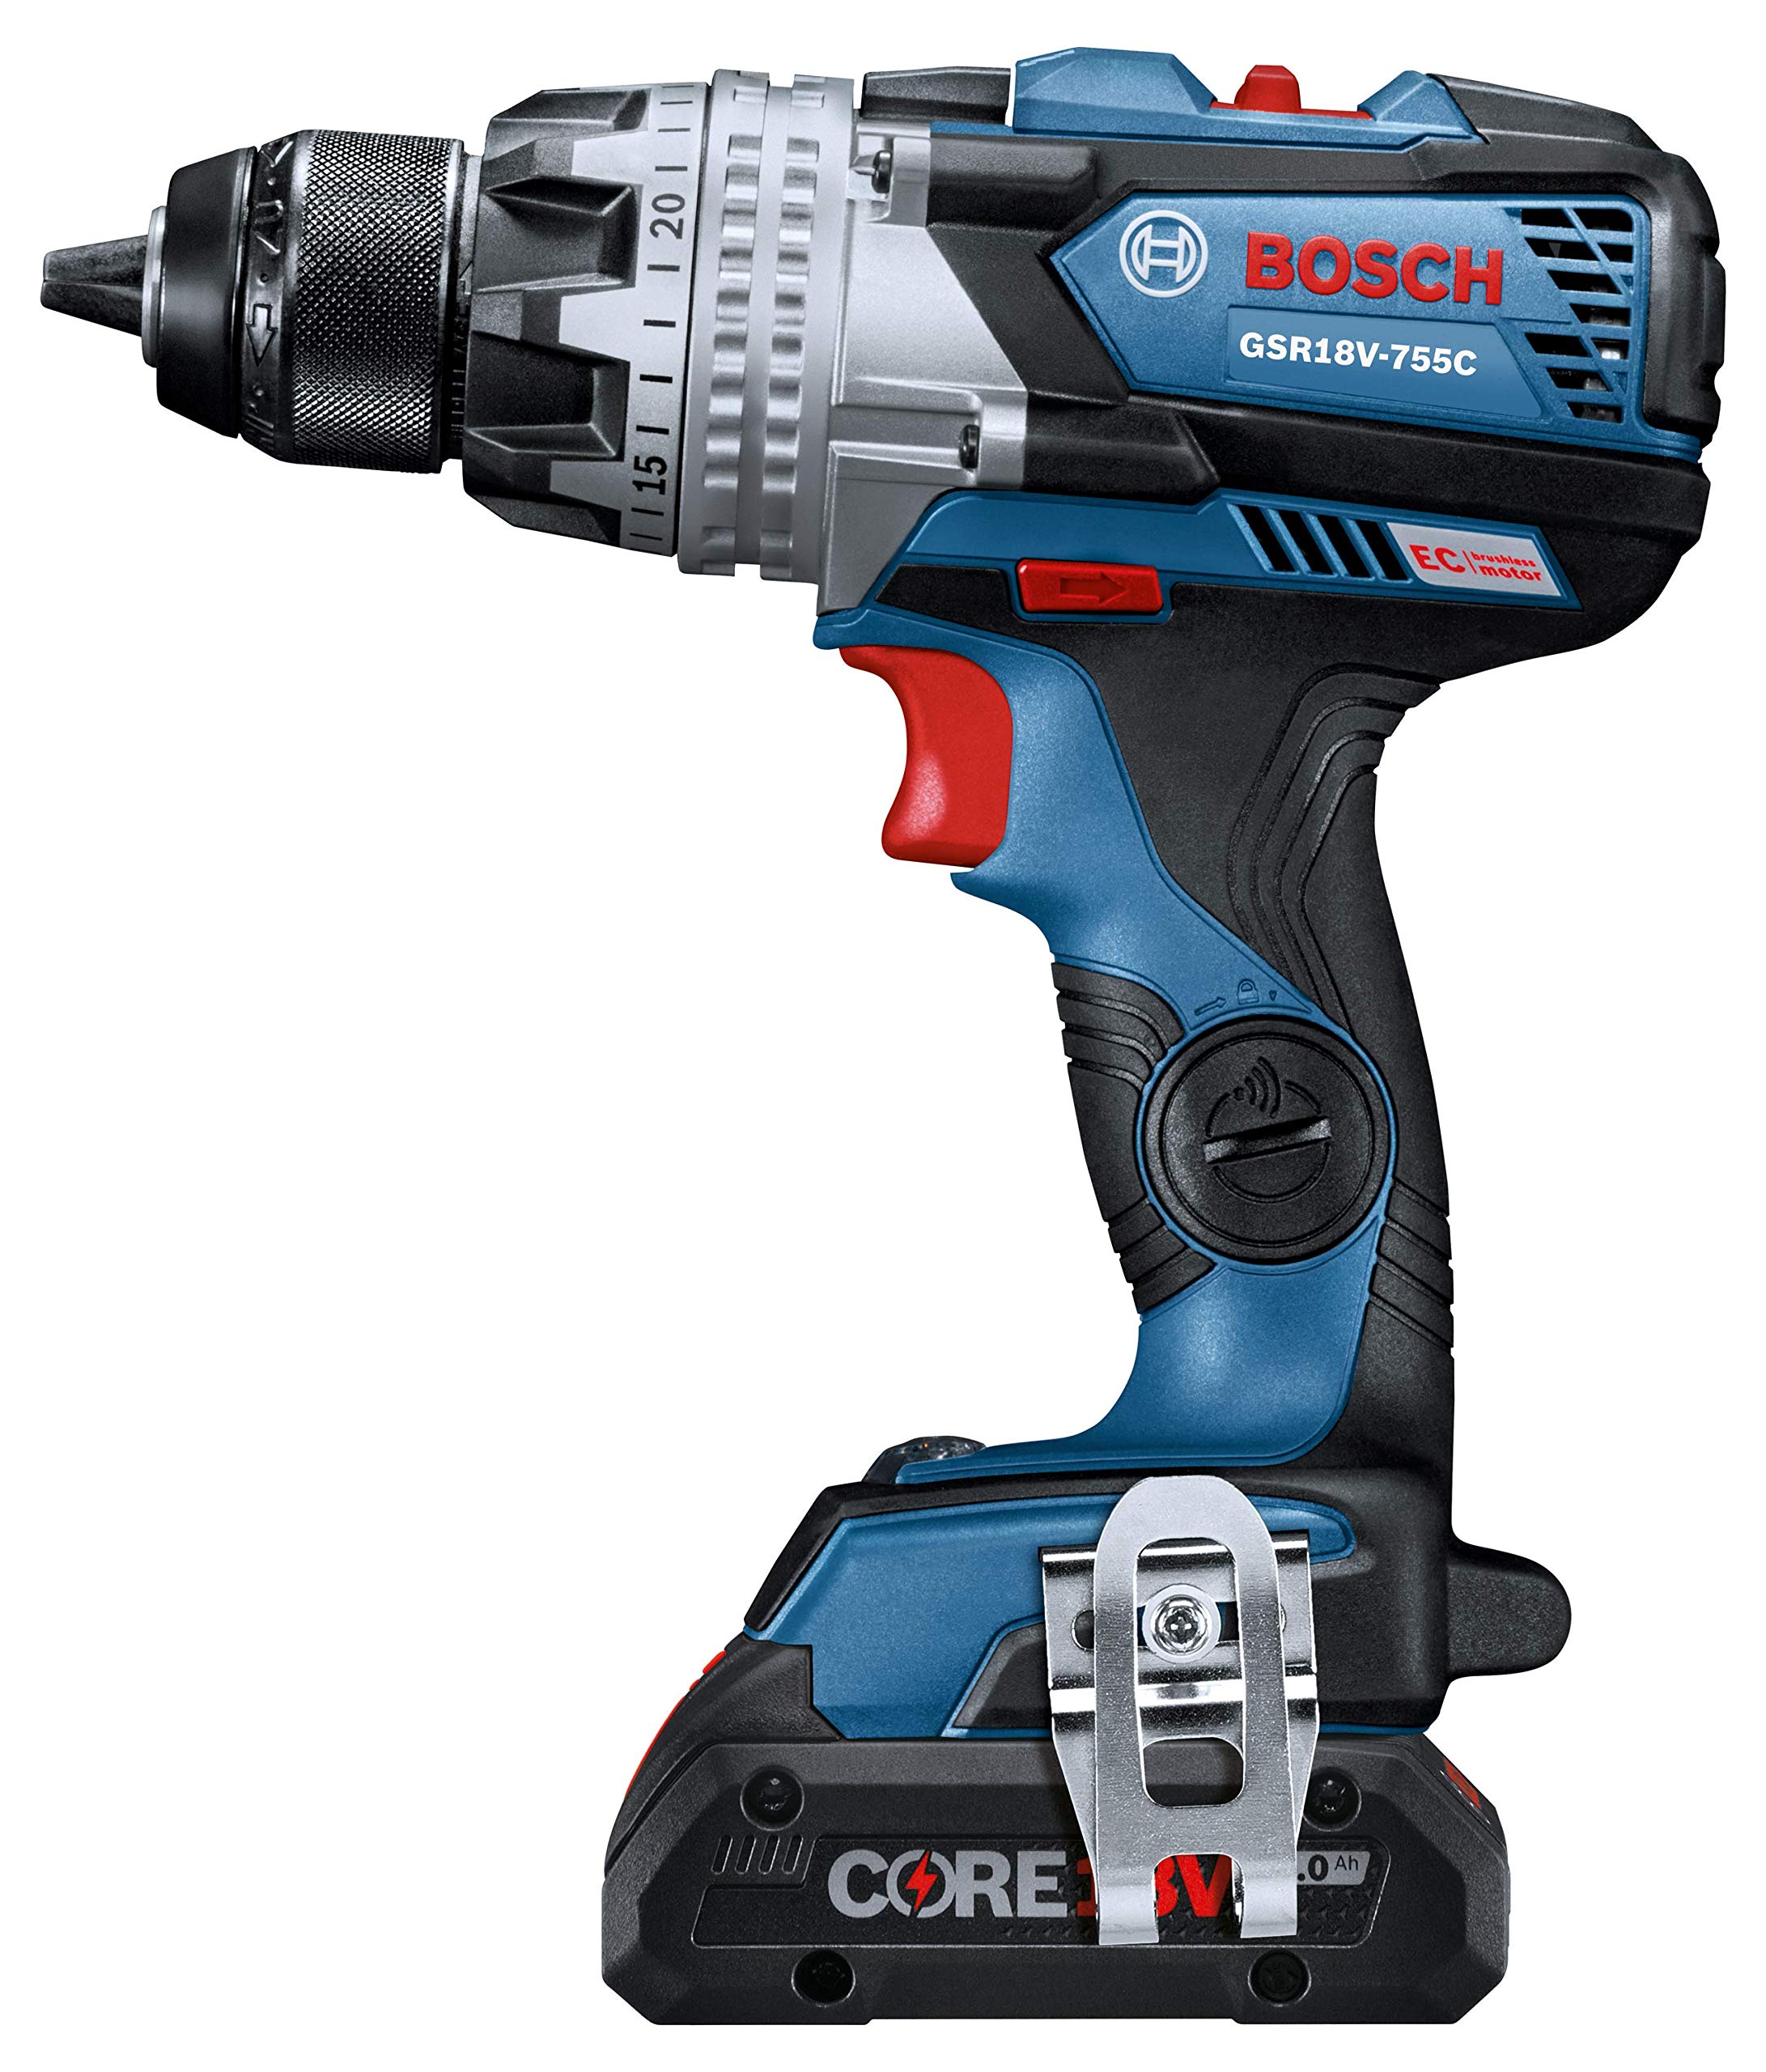 BOSCH GSR18V-755CB25 18V EC Brushless Connected-Ready Brute Tough 1/2 In. Drill/Driver Kit with (2) CORE18V 4.0 Ah Compact Batteries